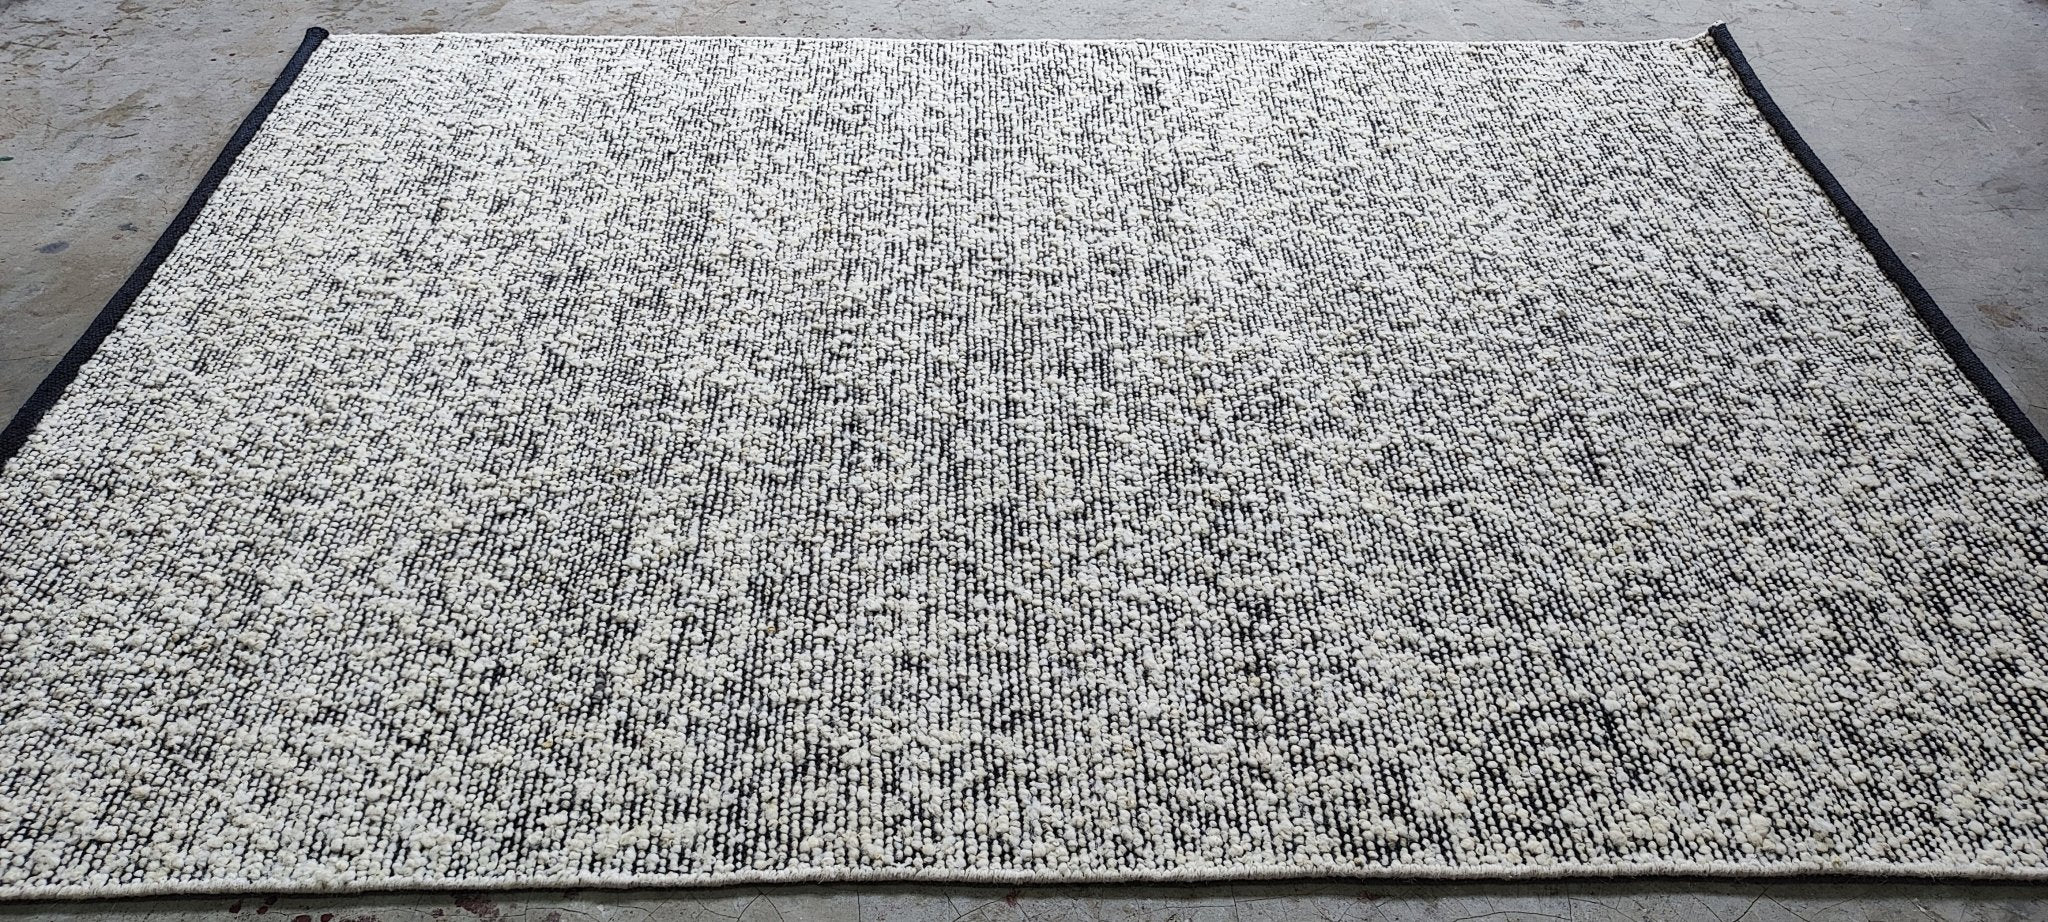 Rocco 5x7 Handwoven Natural Textured Durrie | Banana Manor Rug Factory Outlet